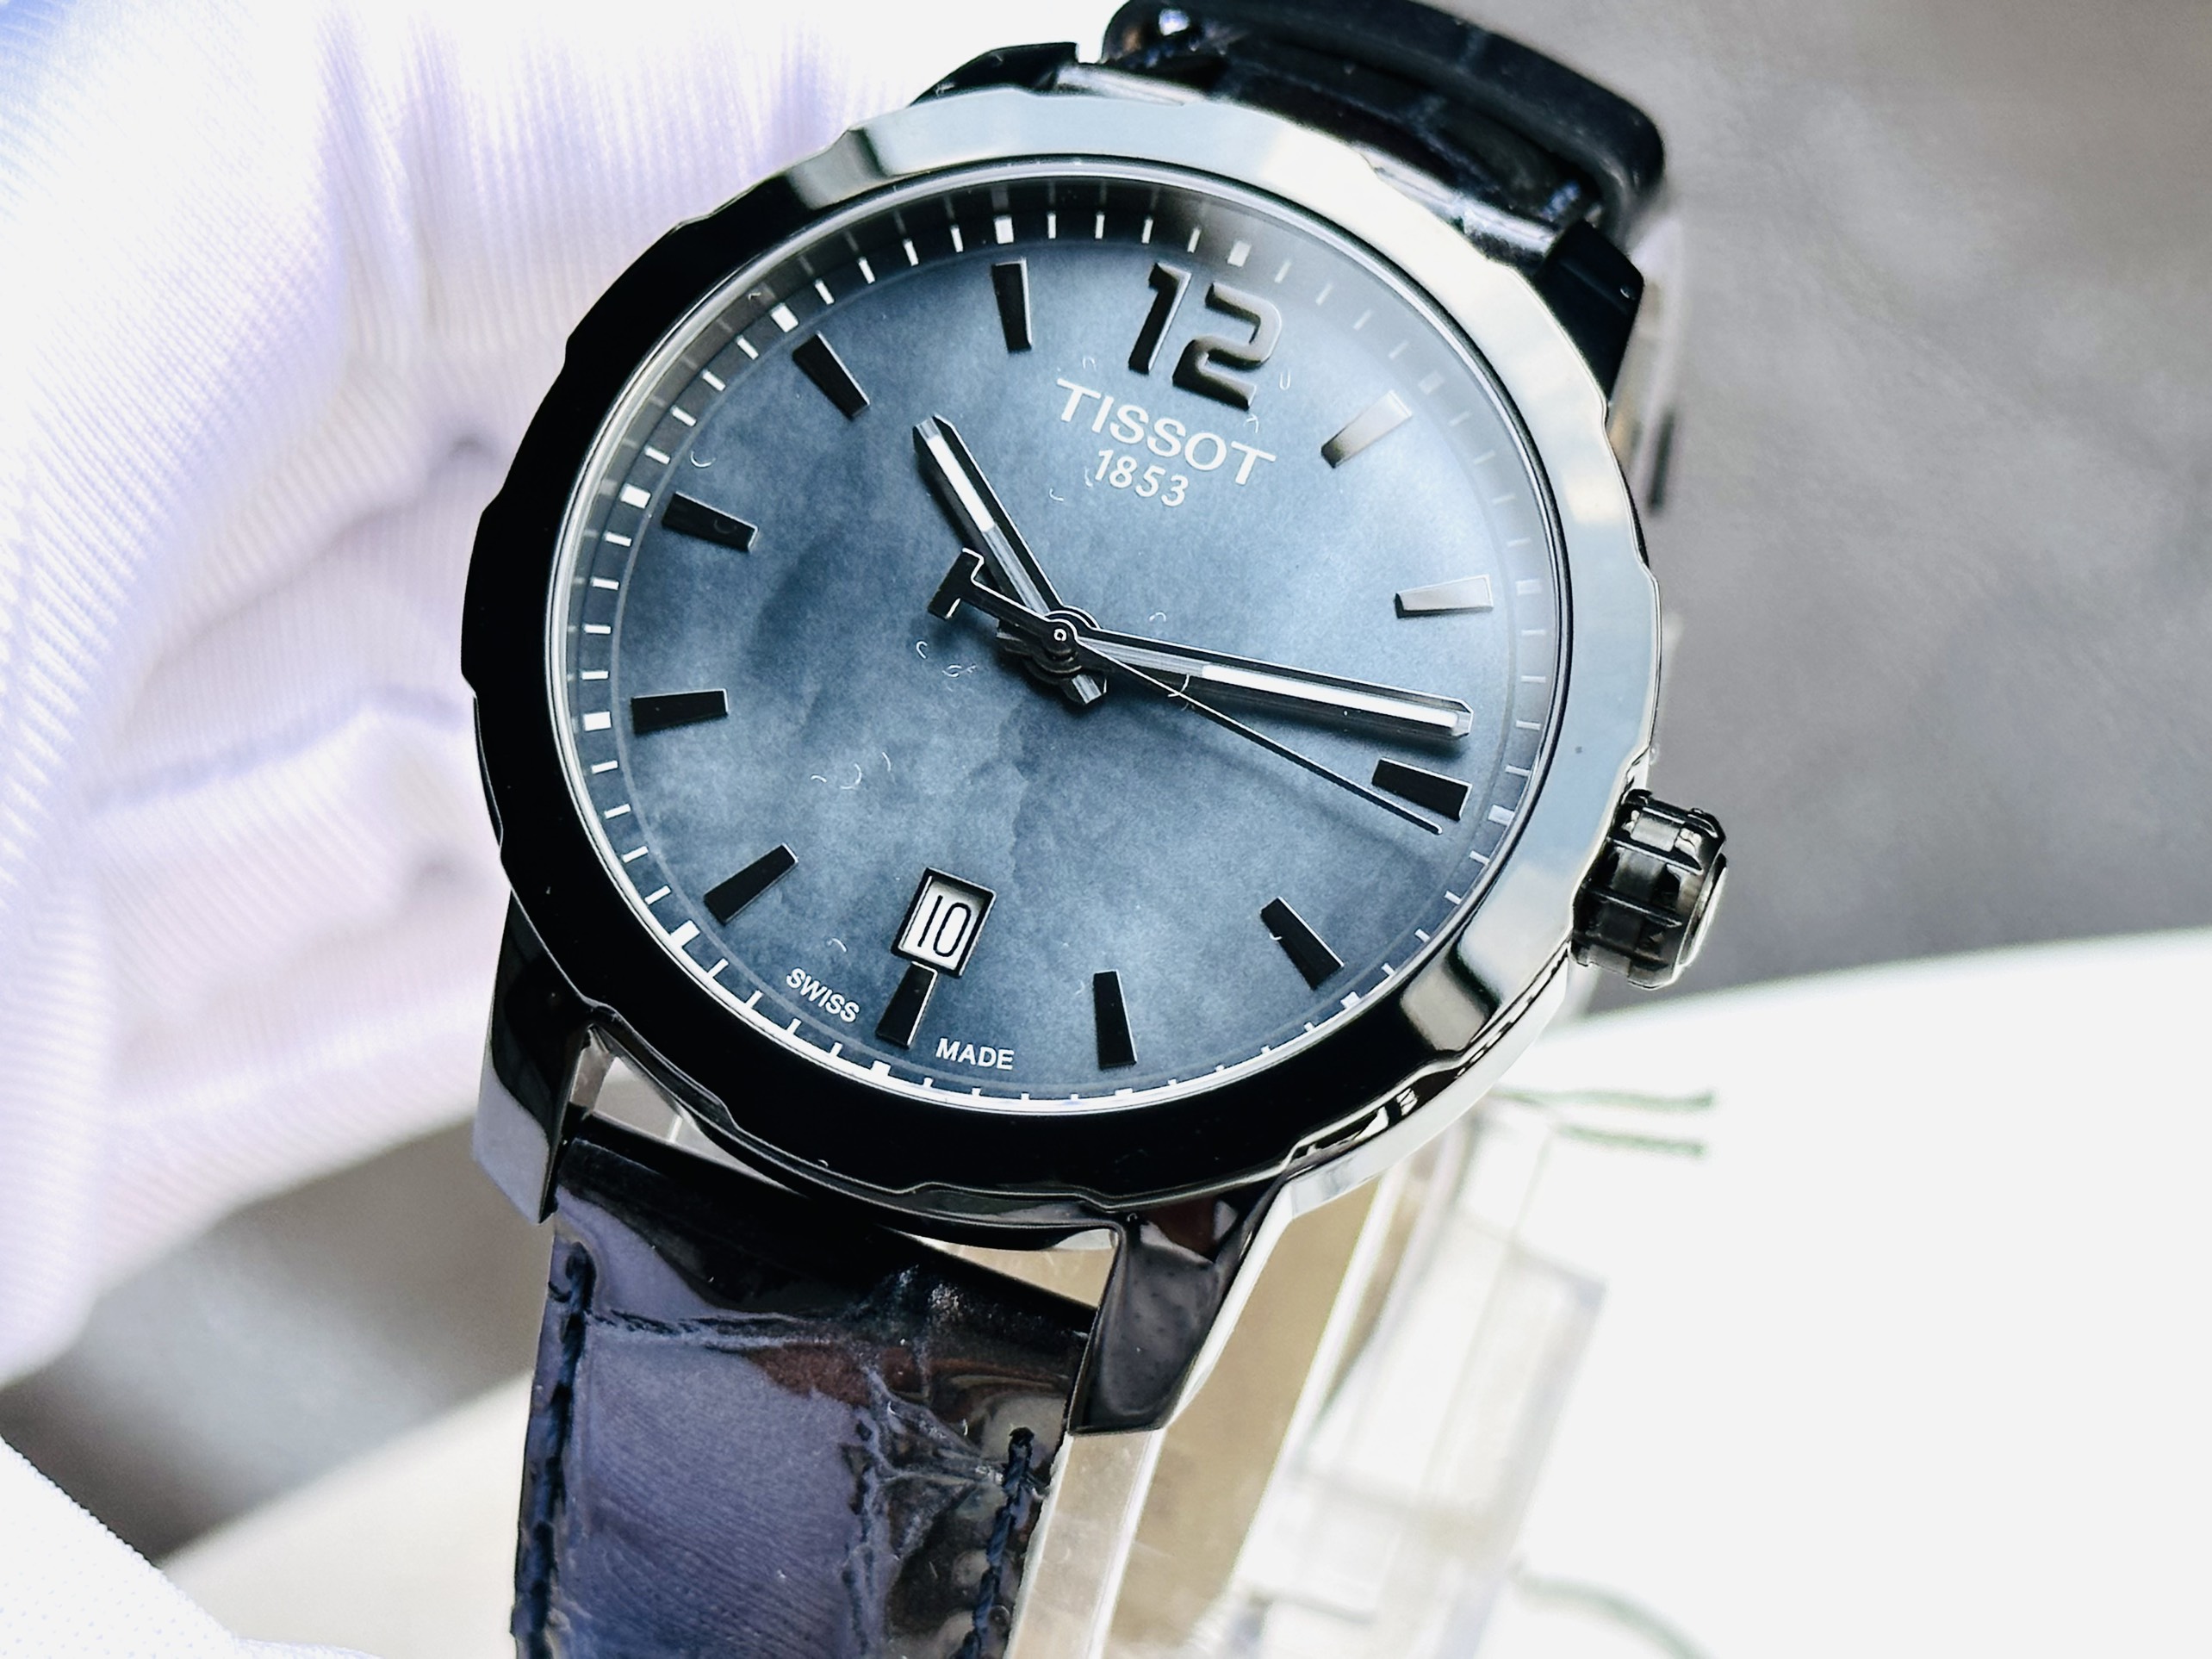 Đồng hồ nam Quickster Black Mother of Pearl Dial Anthracite T095.410.36.127.00